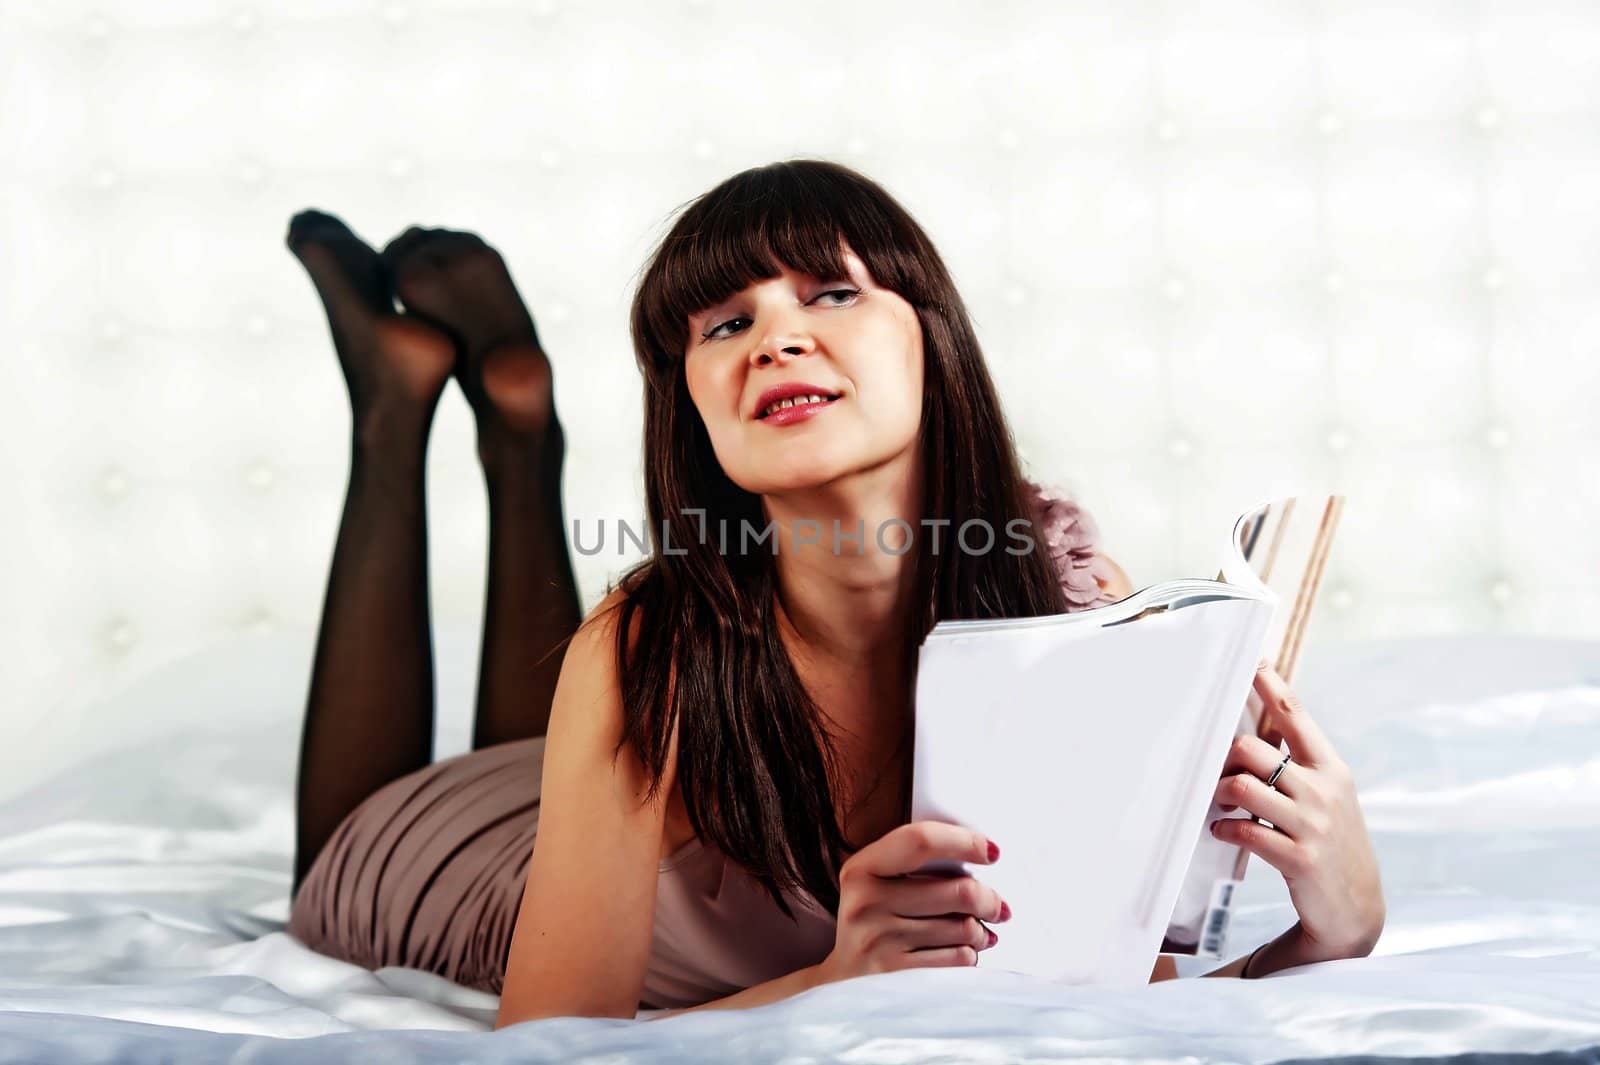 Girl flipping through the magazine while lying on the bed.